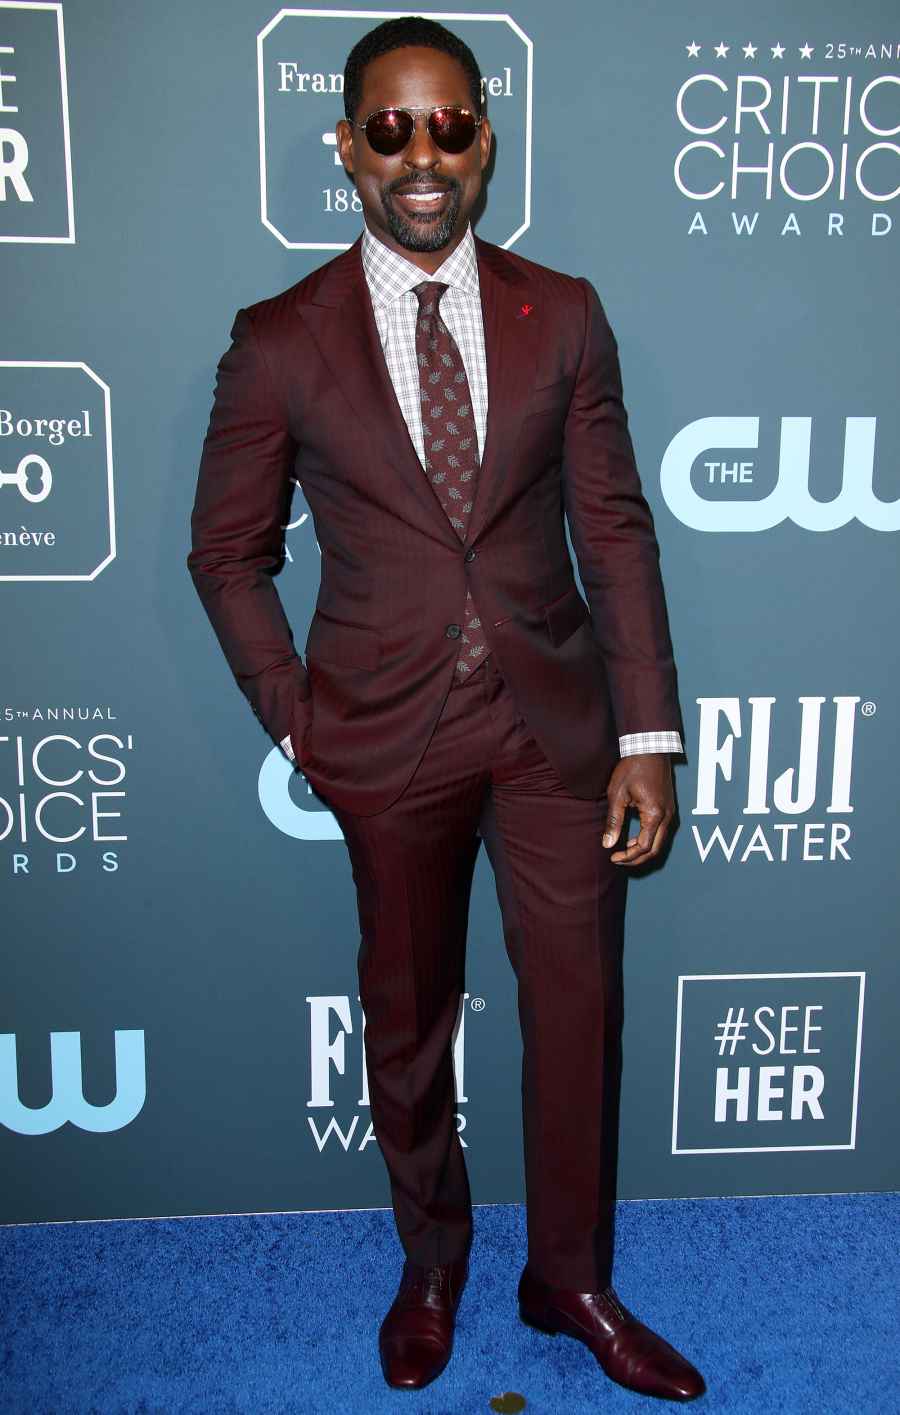 Critic's Choice 2020 Hottest Hunks - Sterling K. Brown